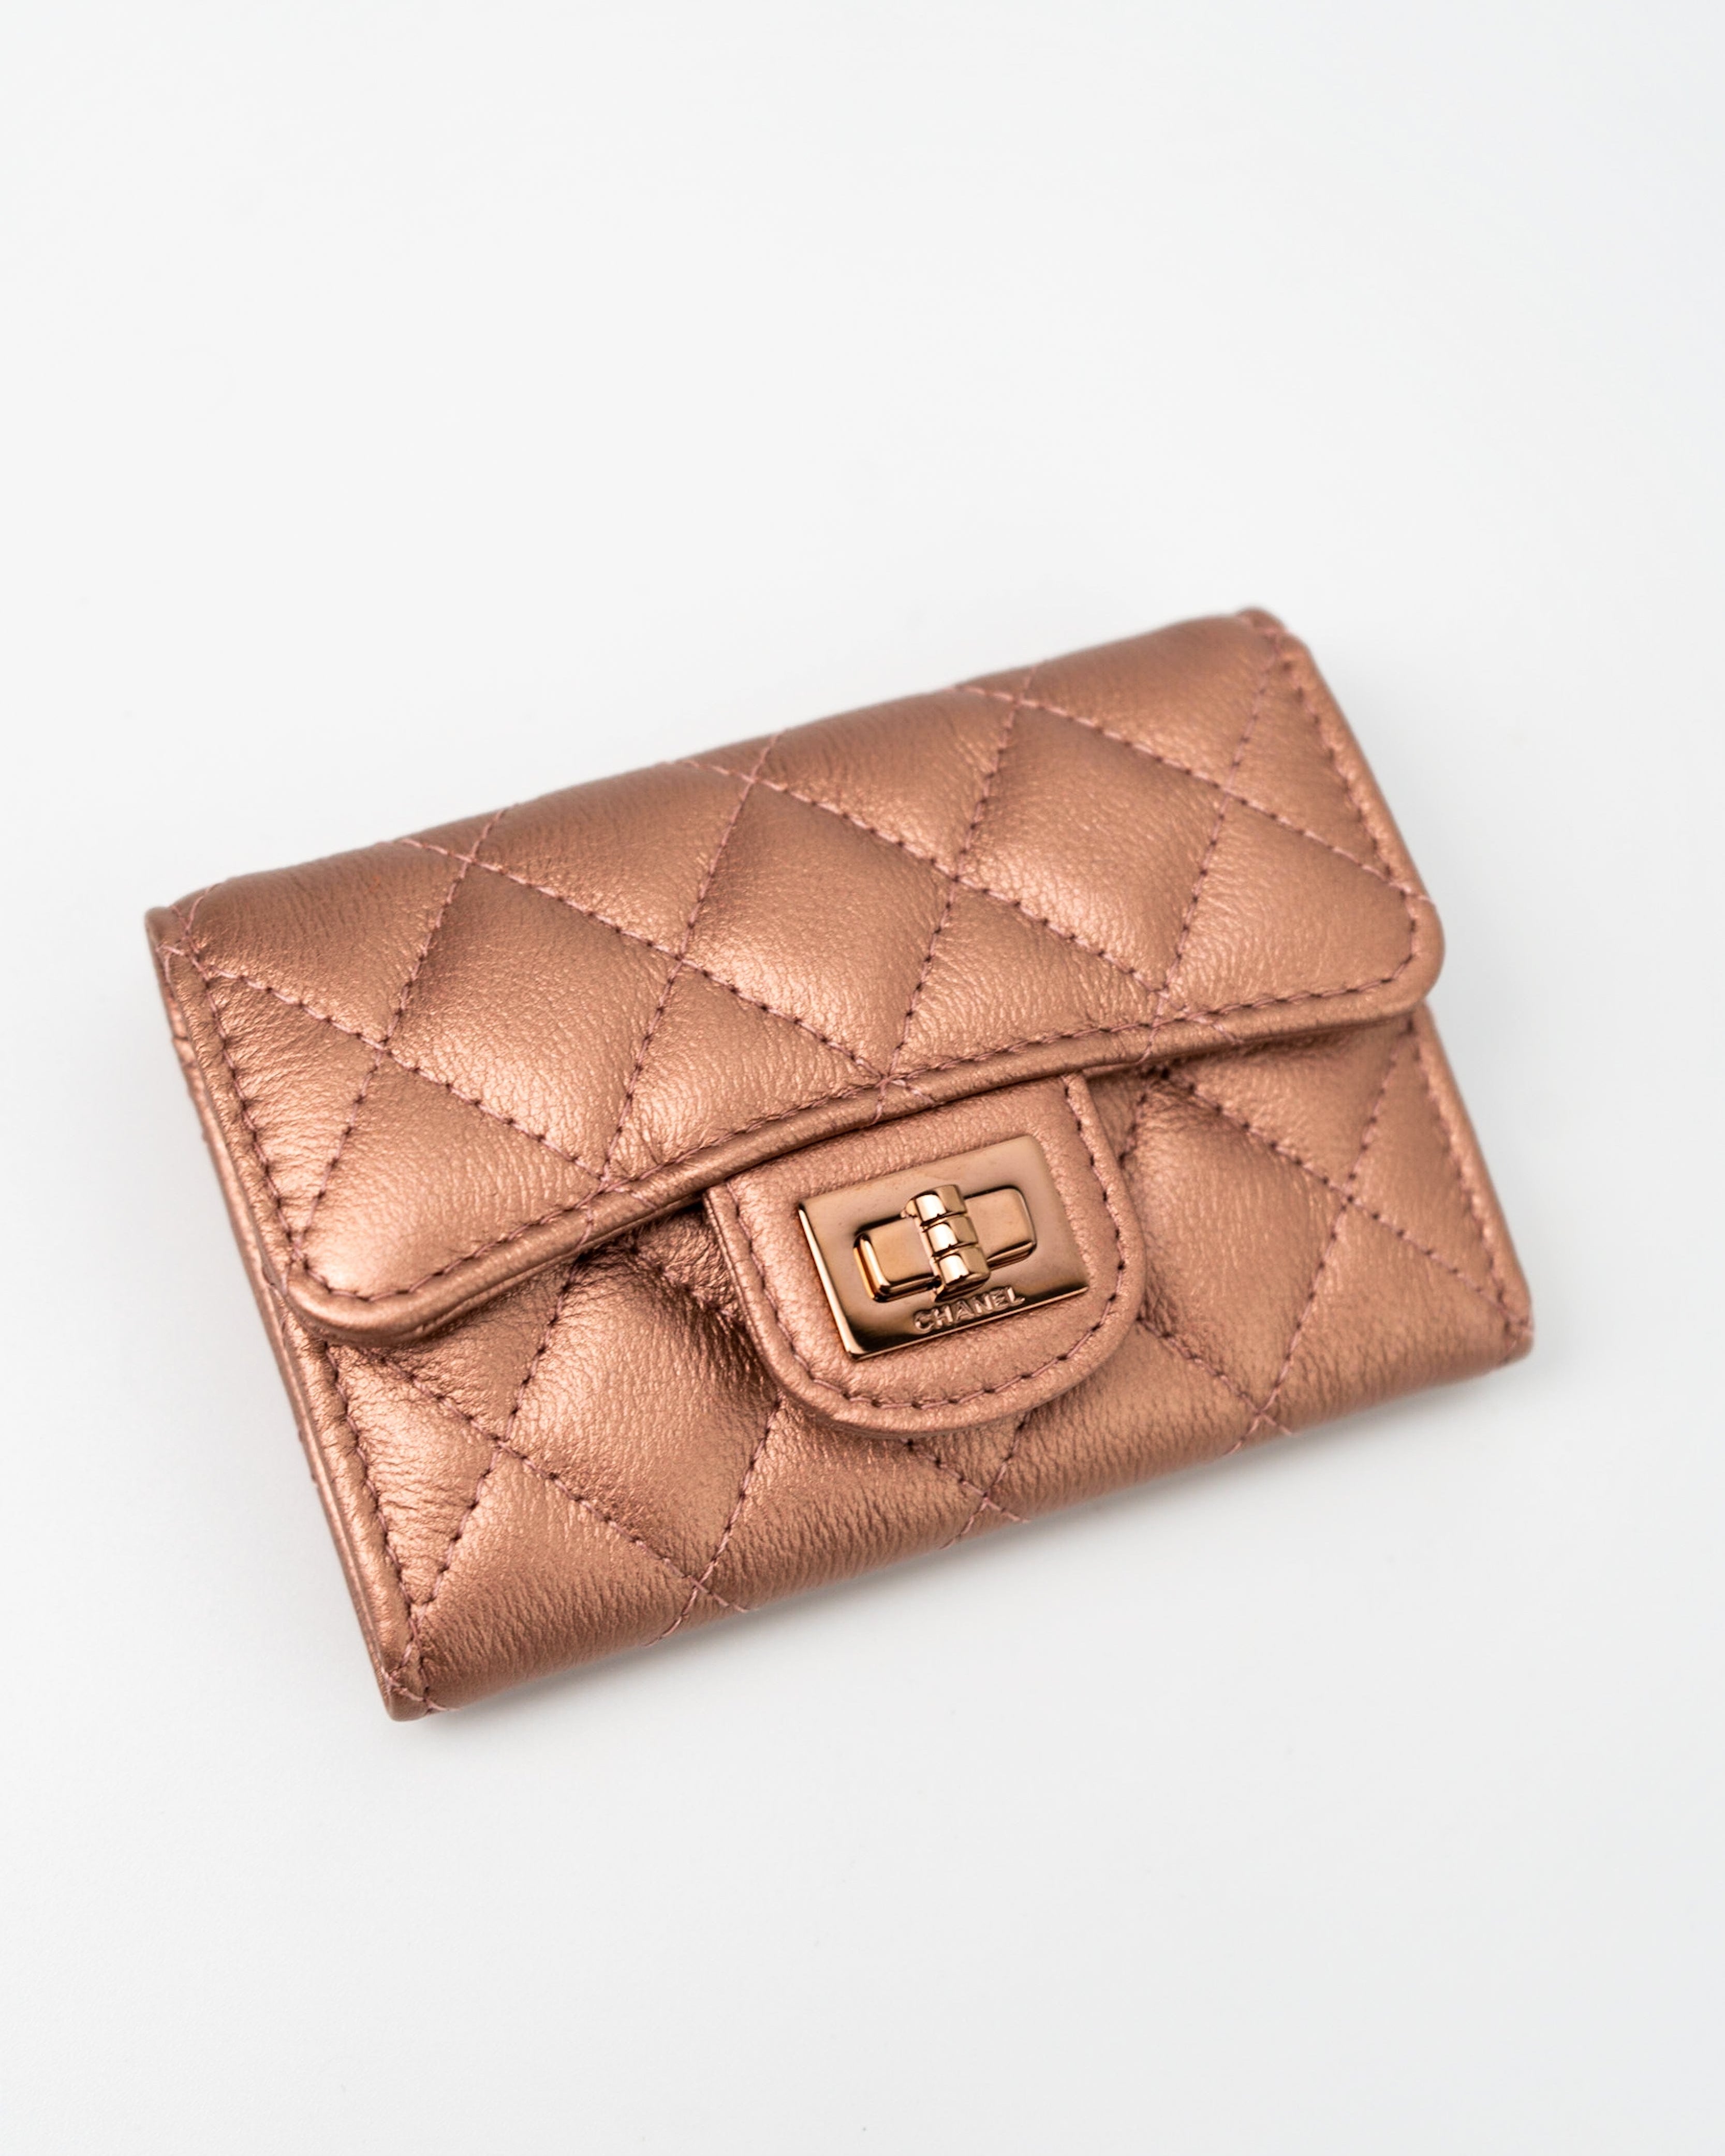 CHANEL Wallet 21A Copper (Rose Gold) 2.55 Flap Card Holder - Redeluxe